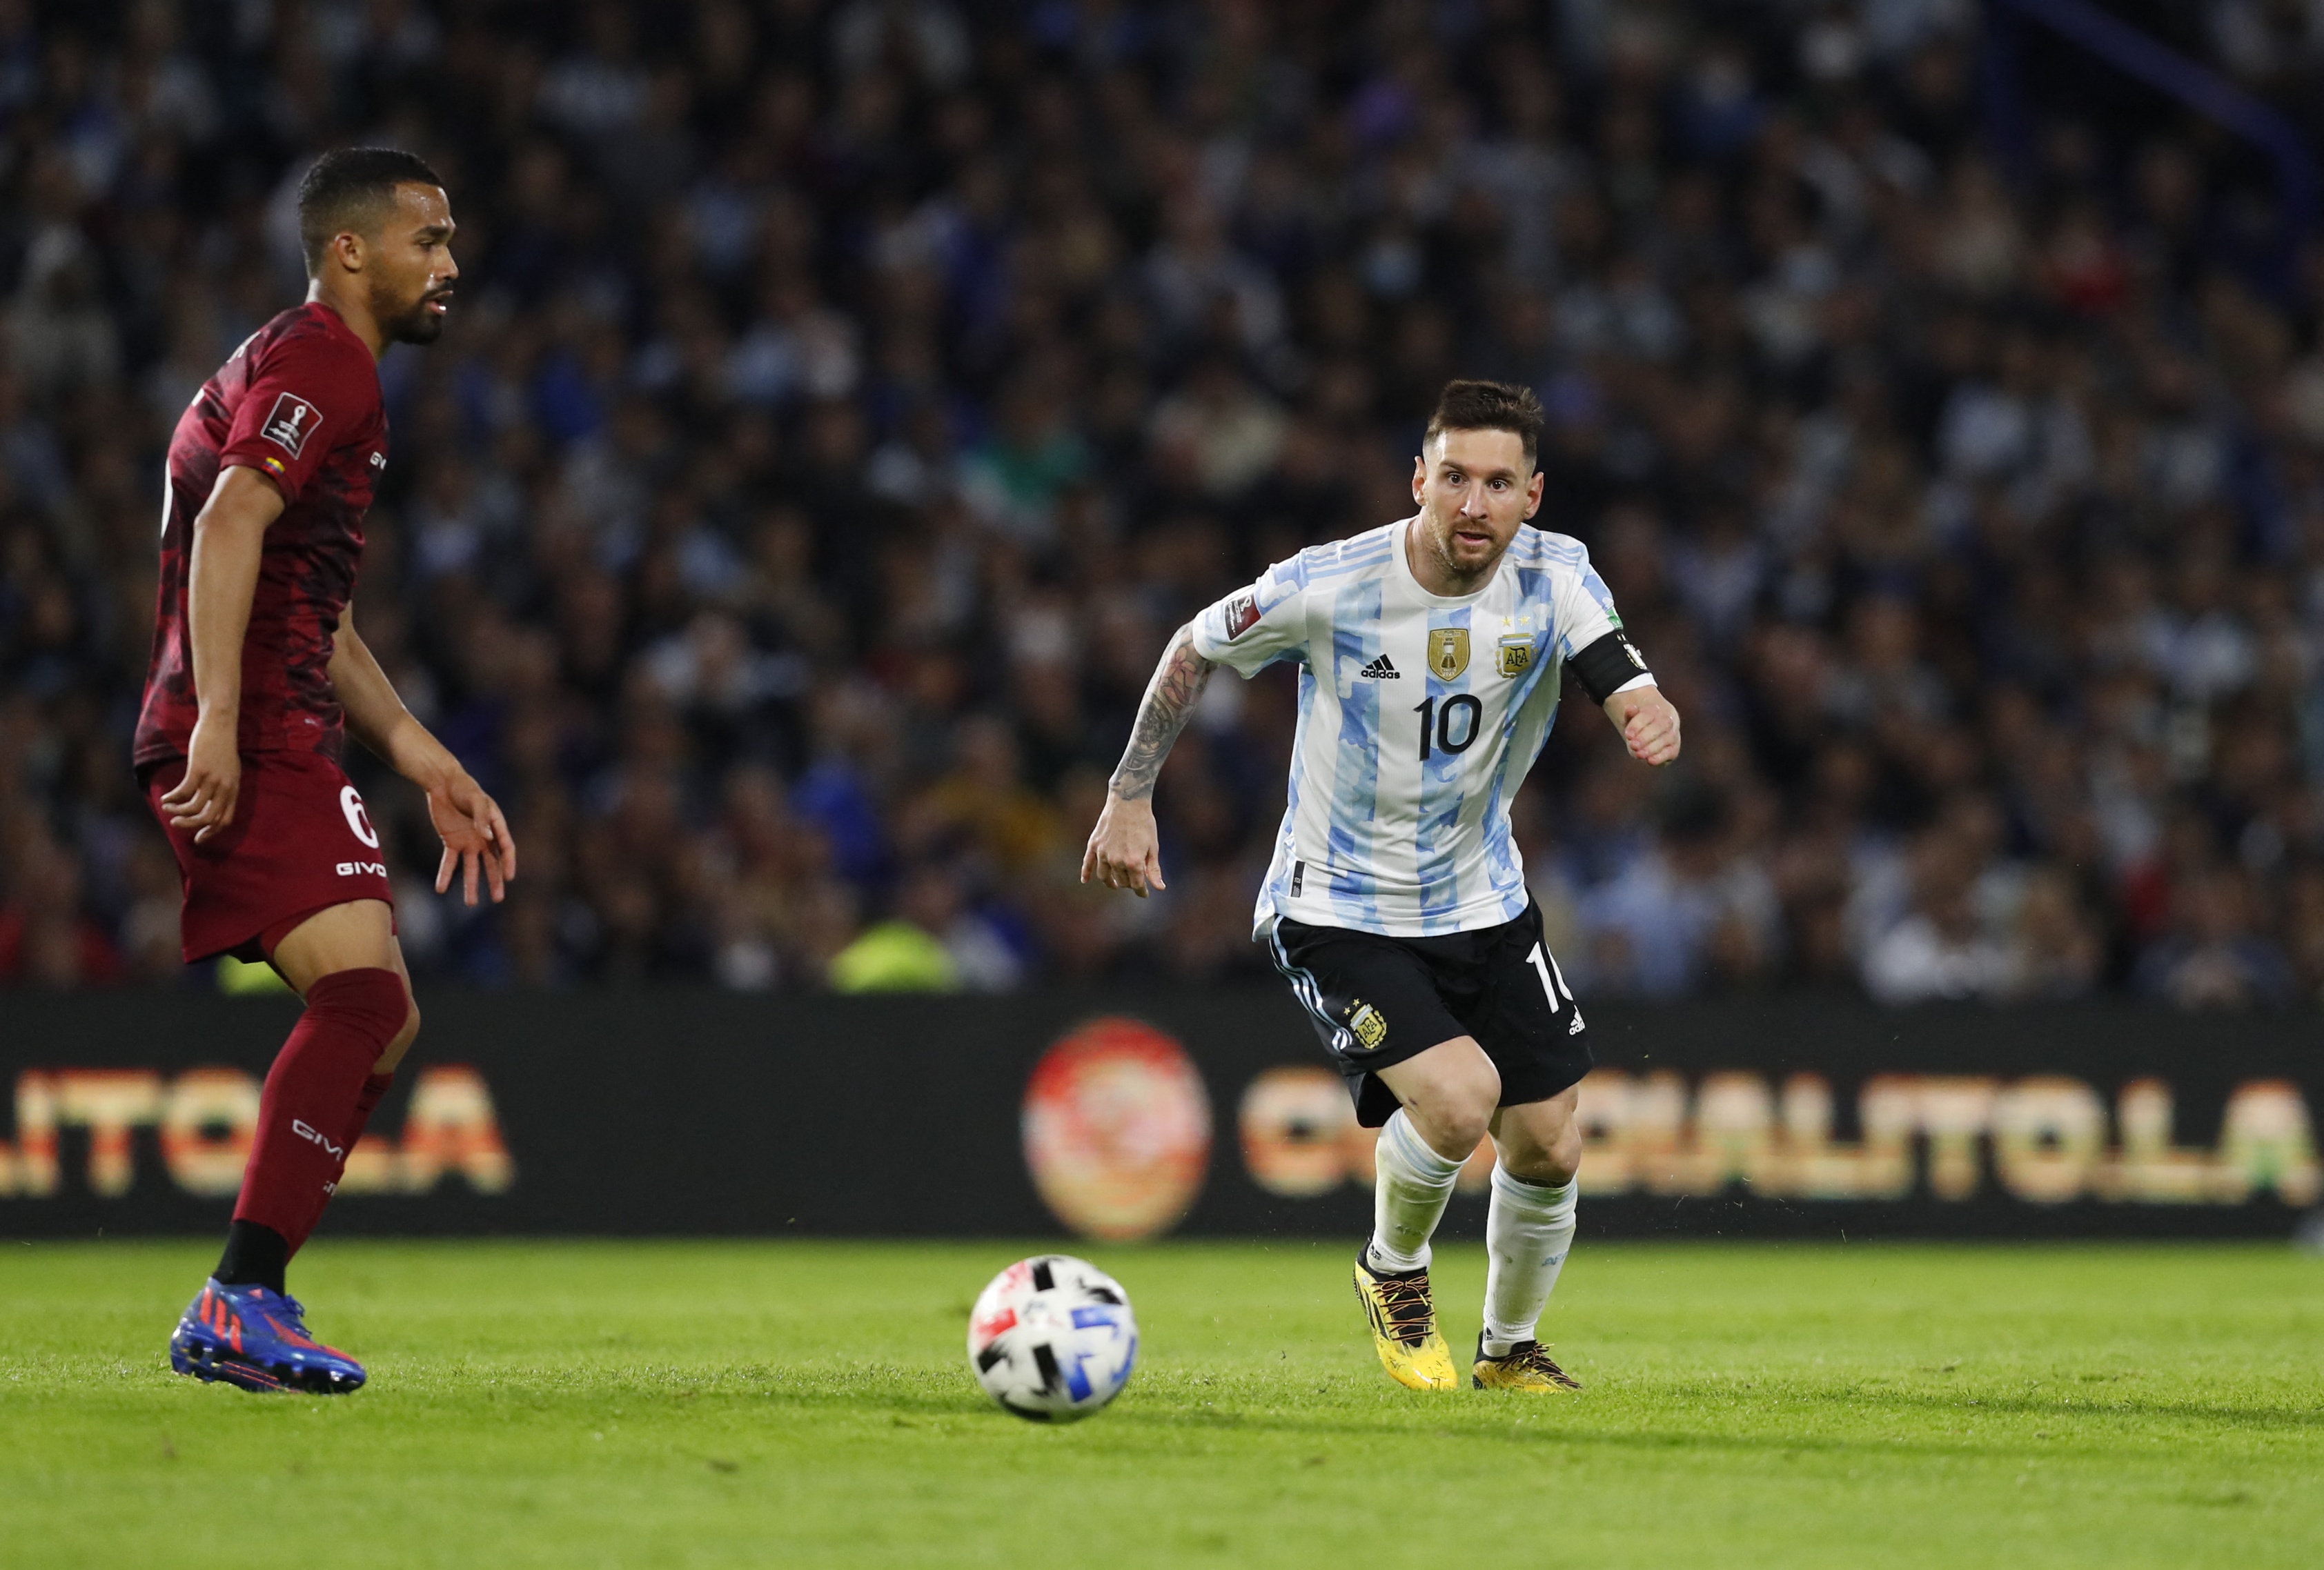 Messi was once again a figure in Argentina against Venezuela (REUTERS/Agustin Marcarian)